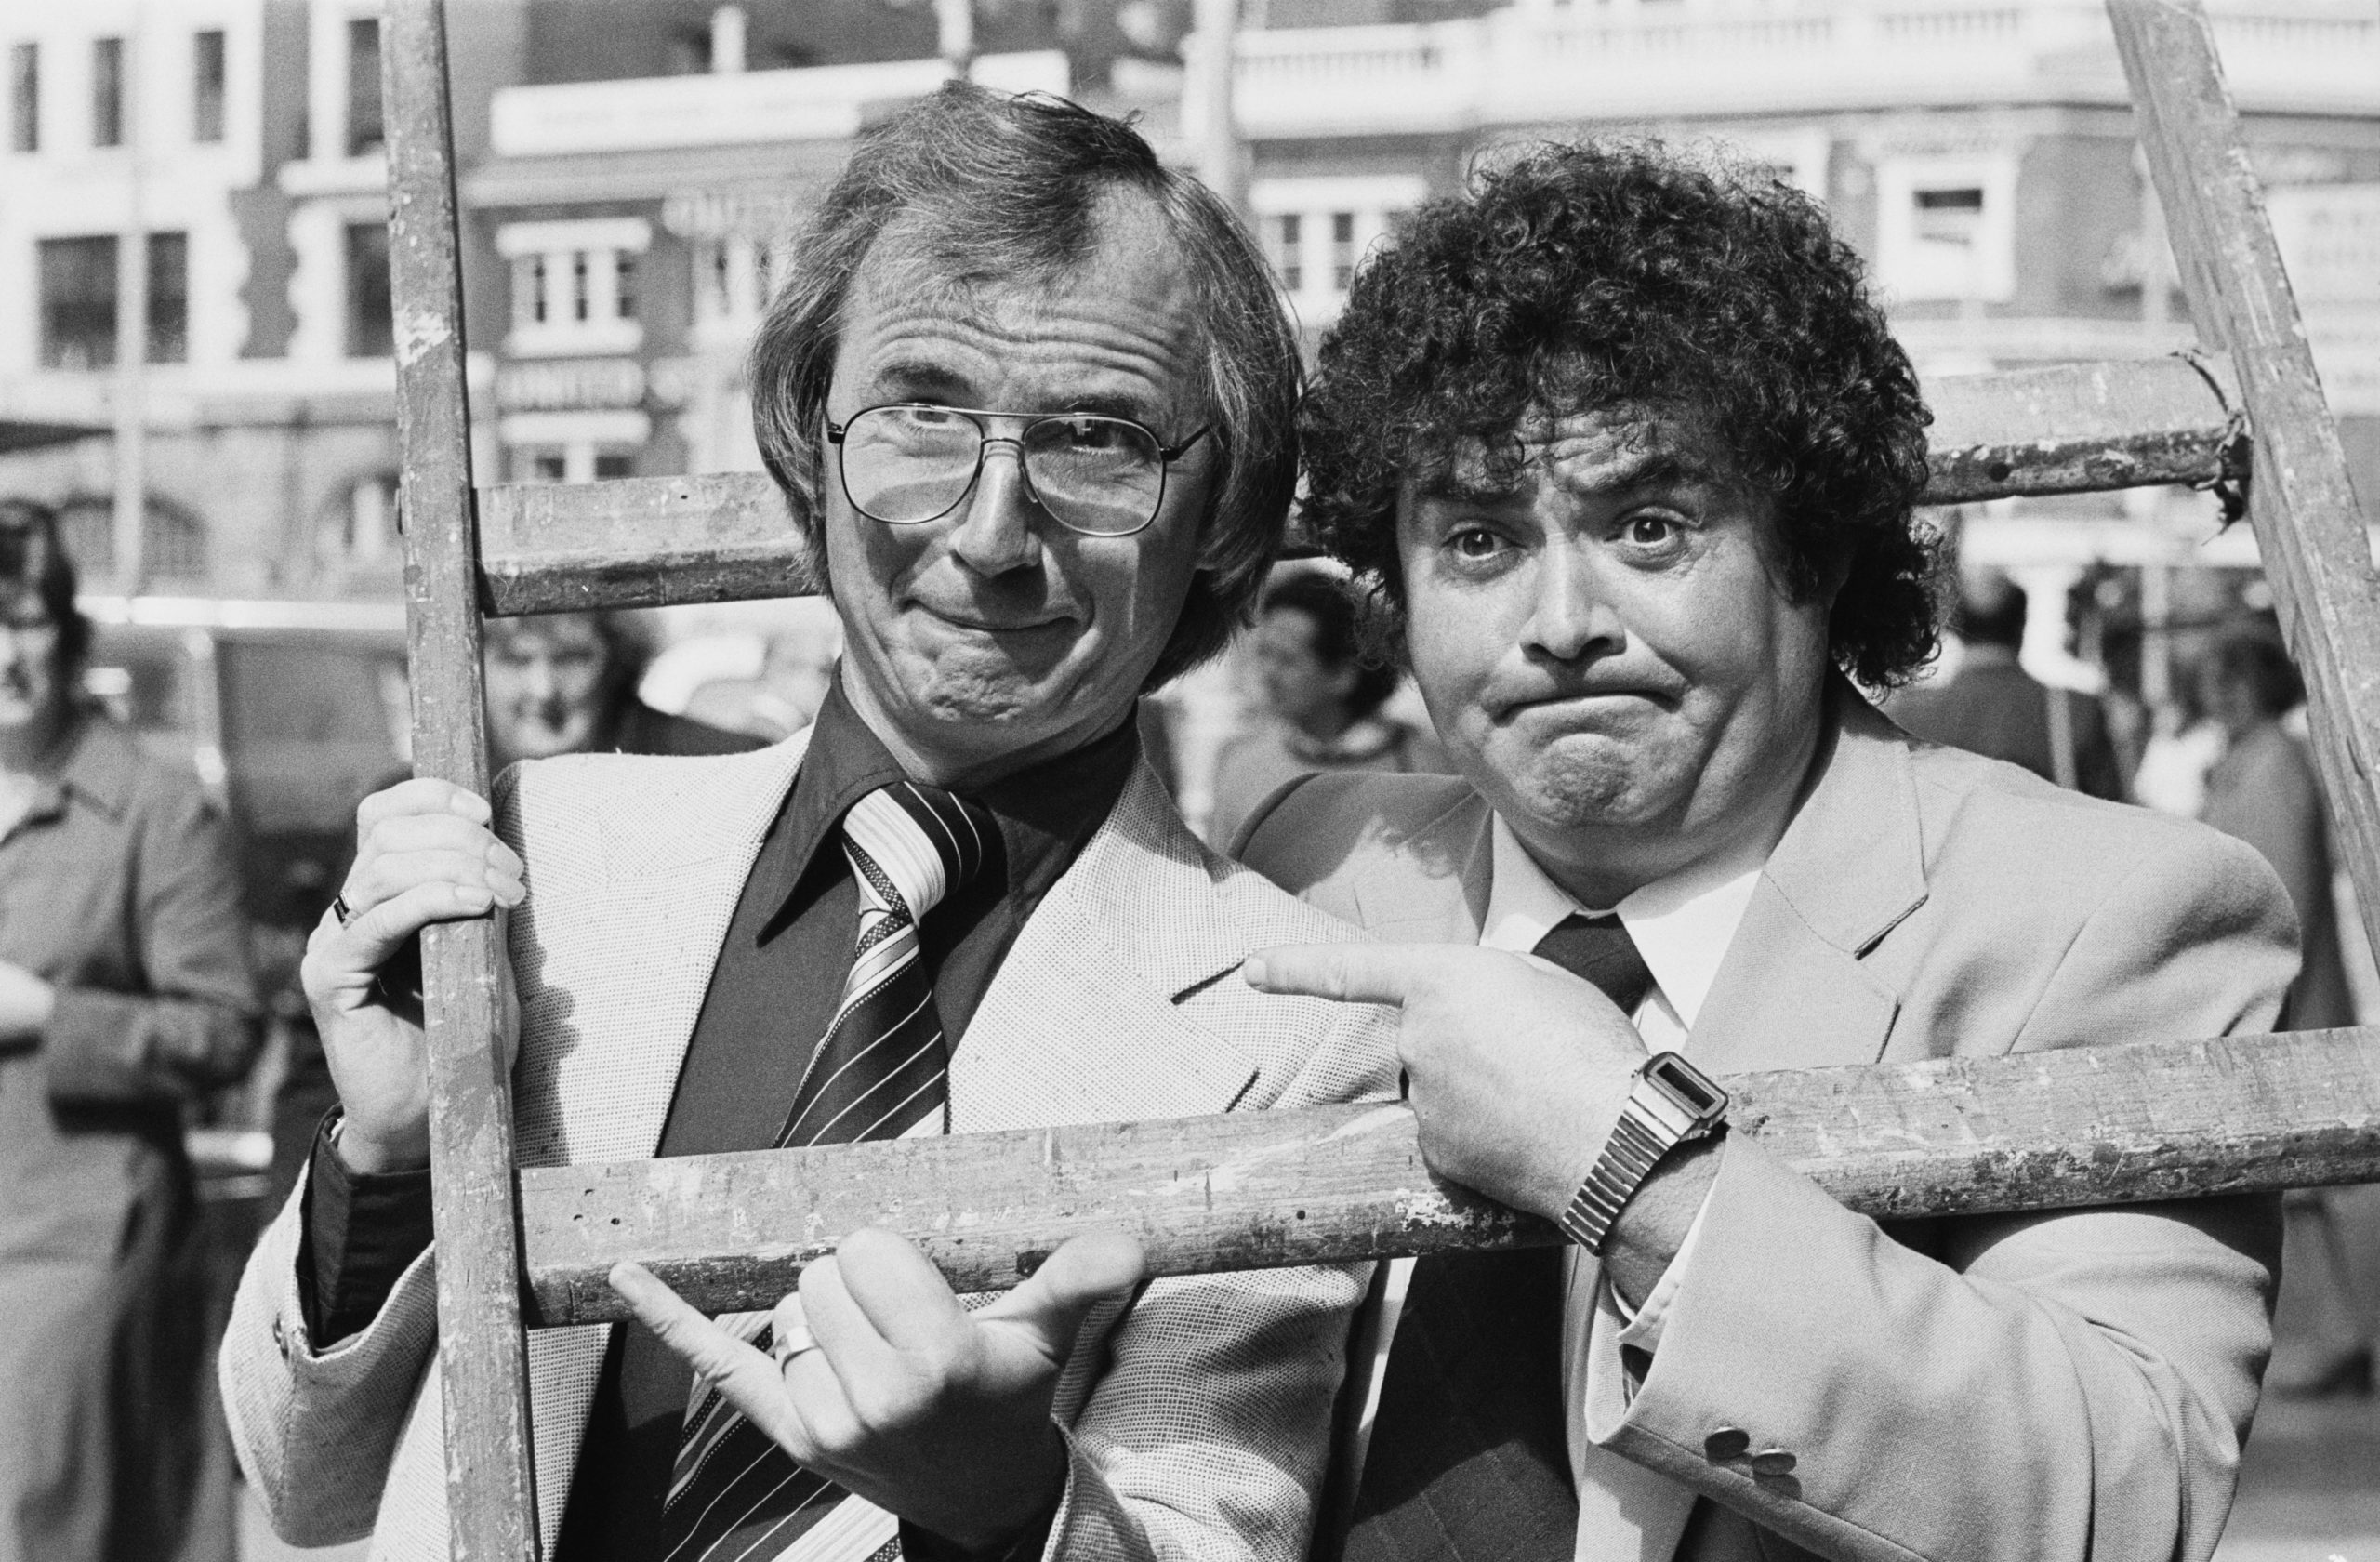 Comedy duo Syd Little and Eddie Large. (Photo by Mike Lawn/Evening Standard/Hulton Archive/Getty Images)